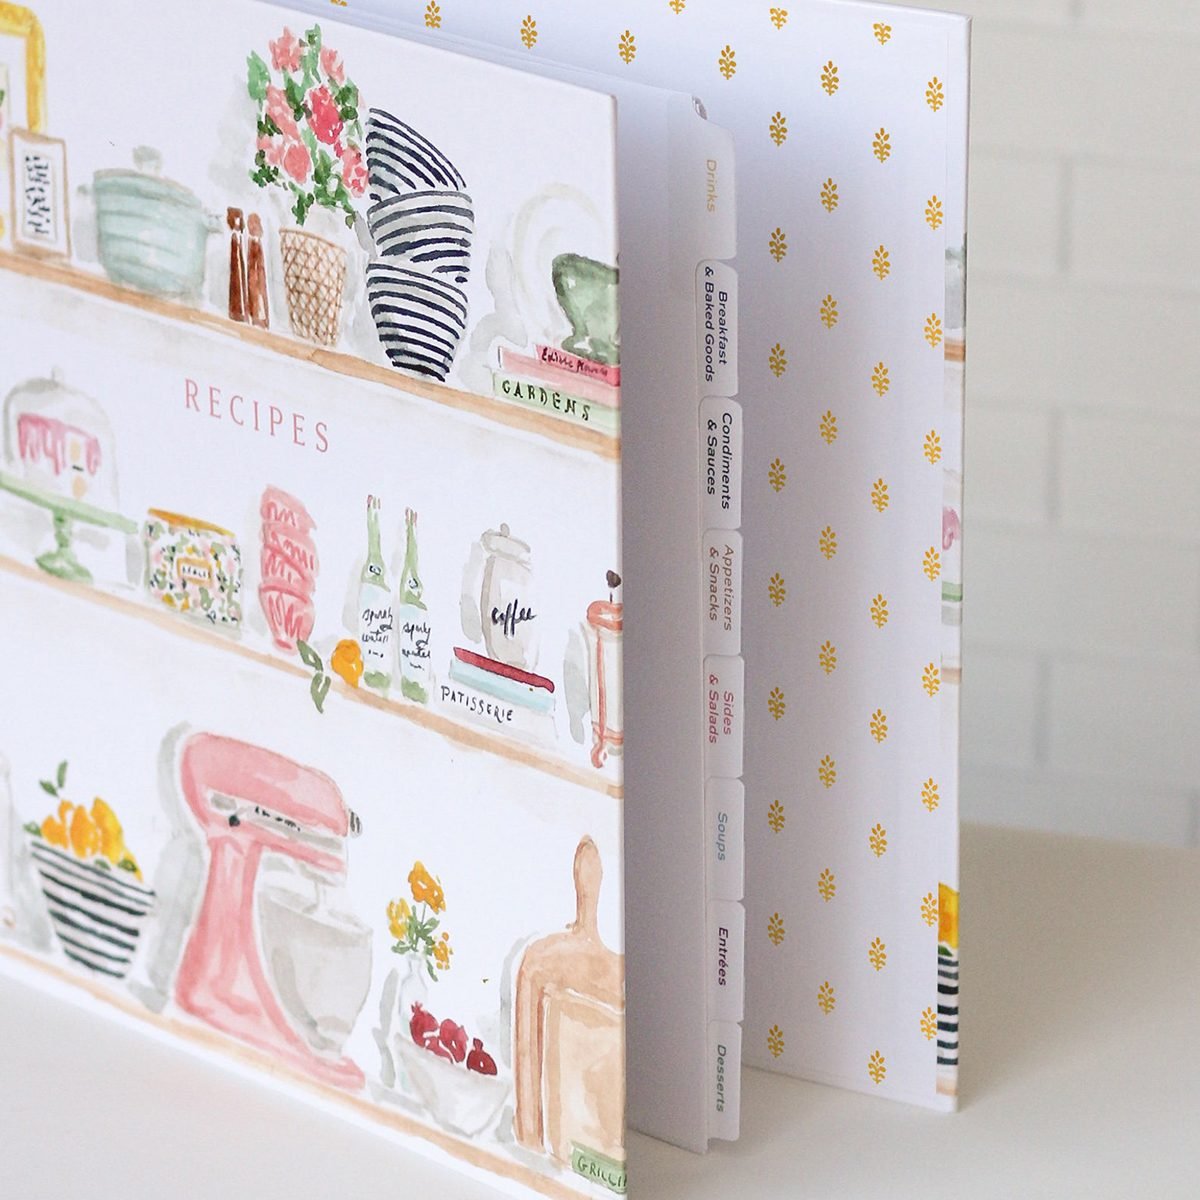 14 Of The Prettiest Recipe Books And Tins You Can Buy